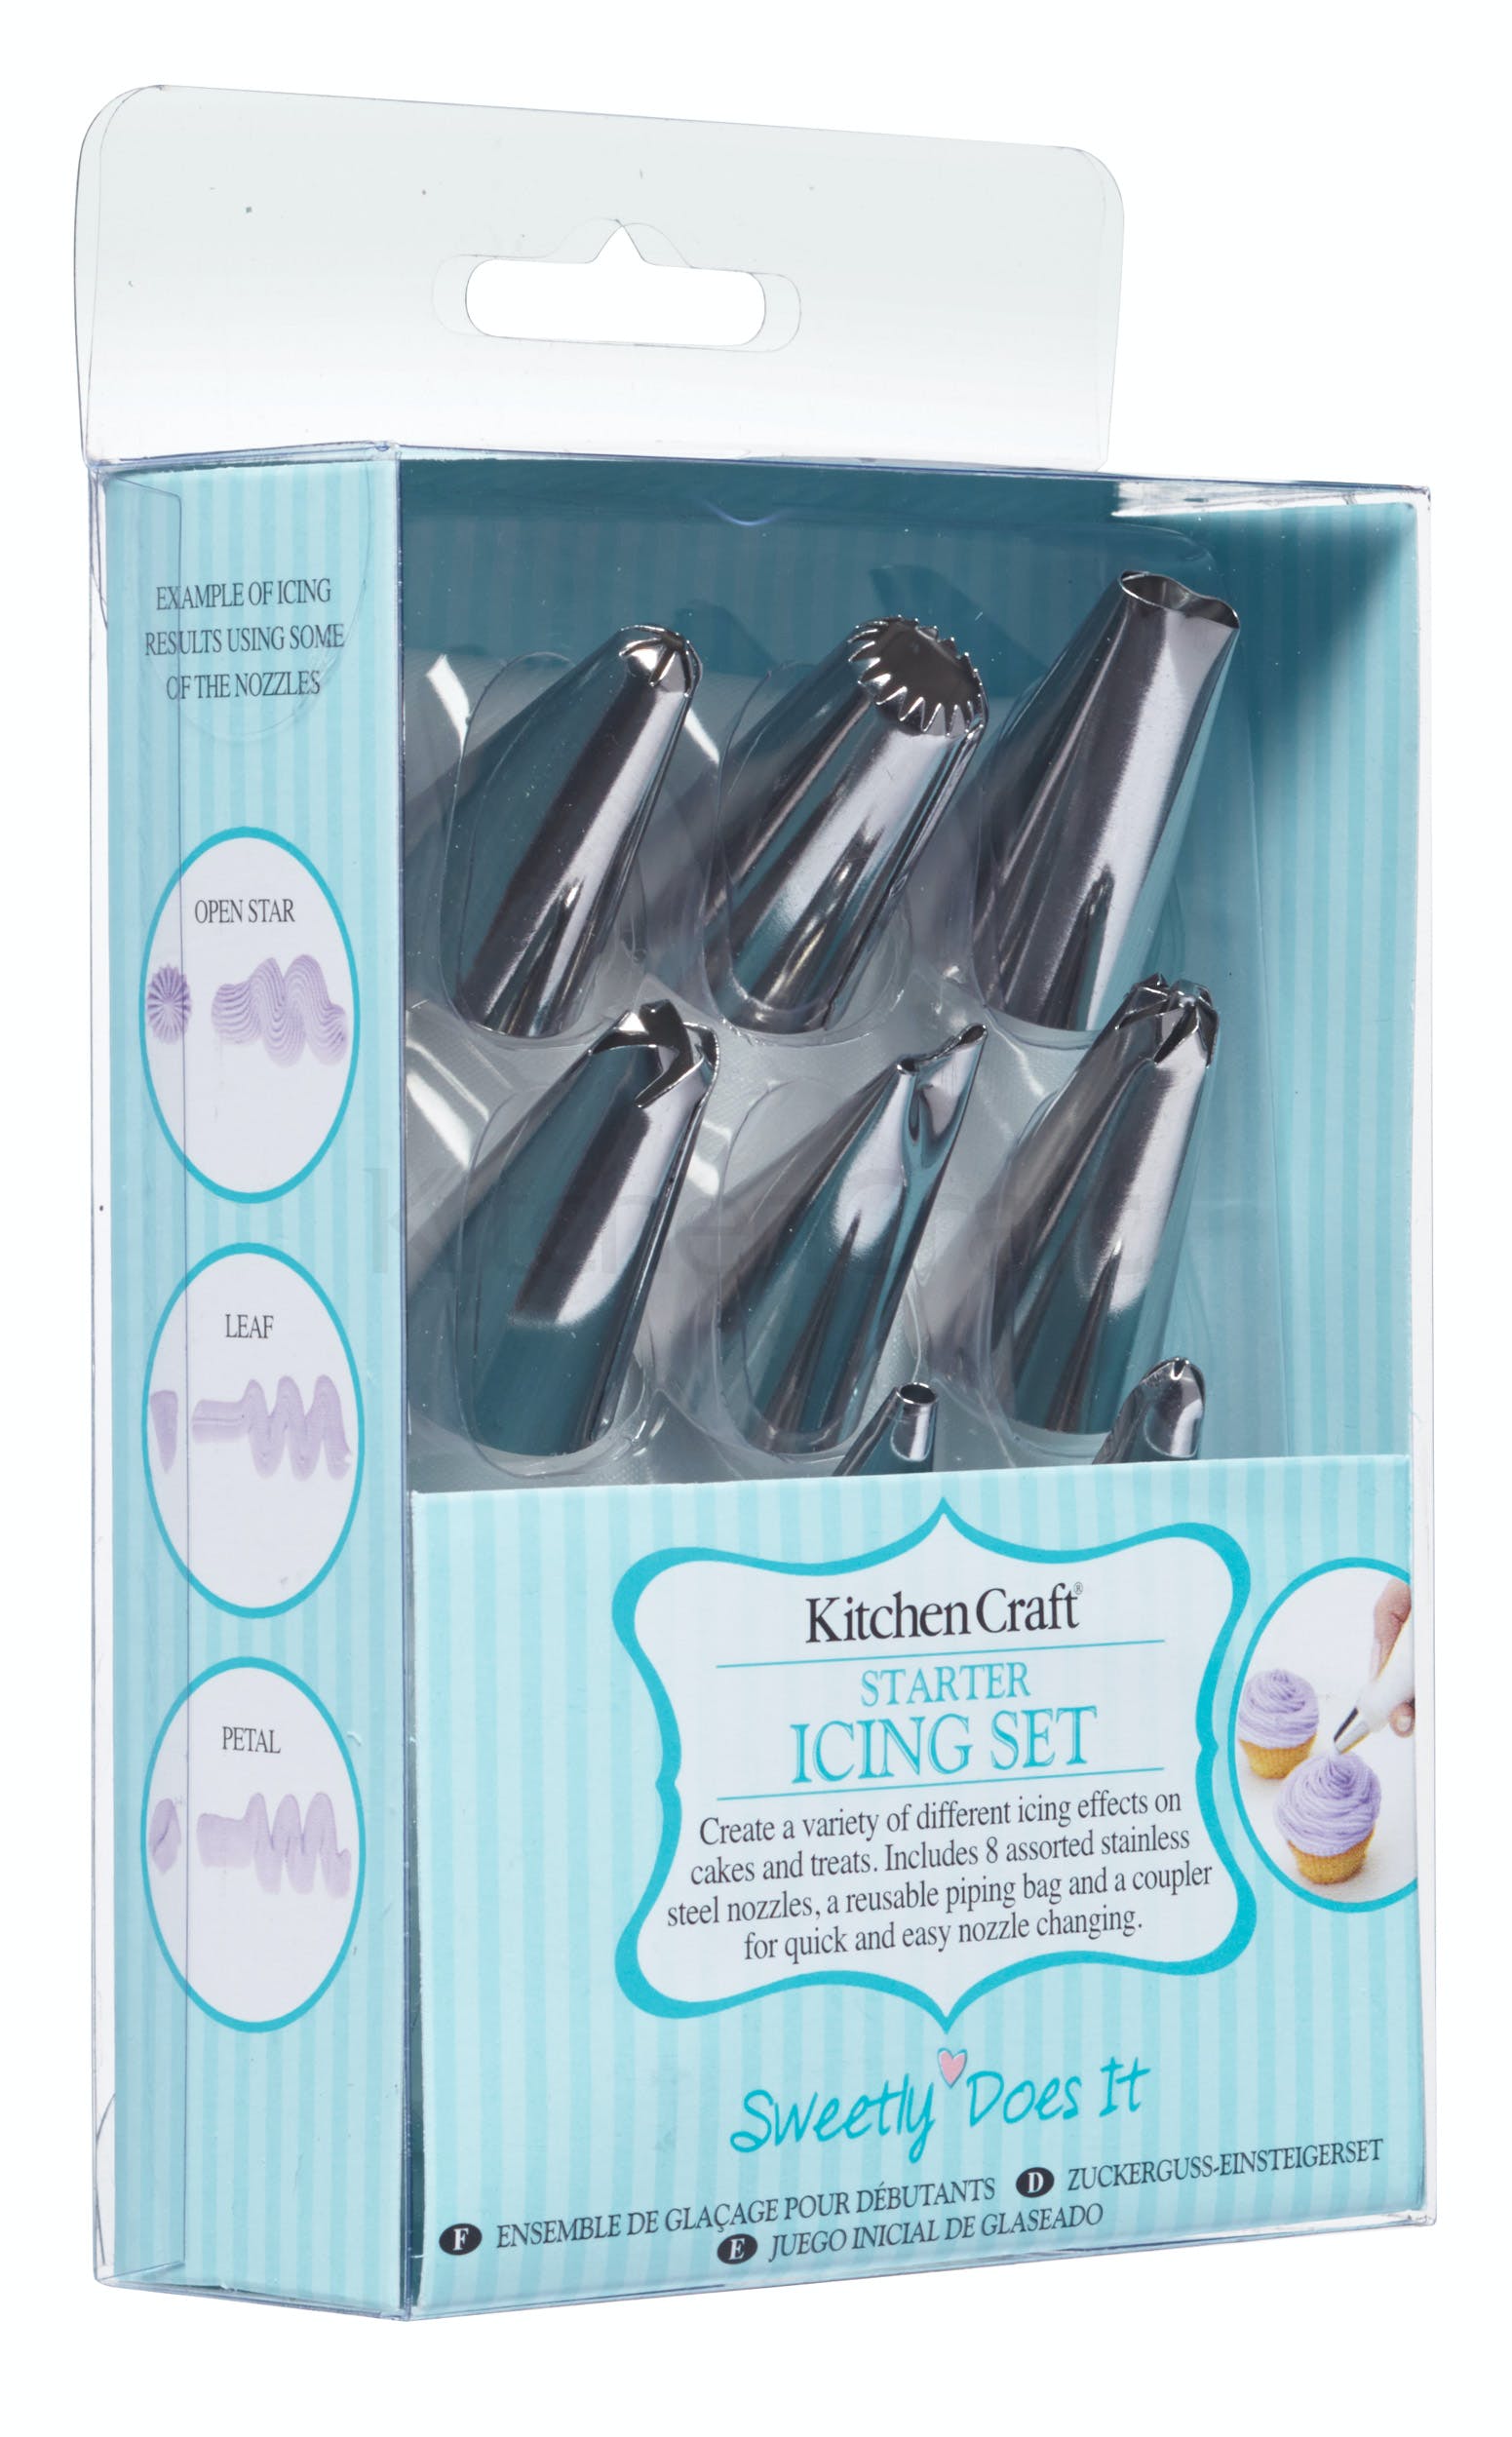 Sweetly Does It 10 Piece Starter Icing Set